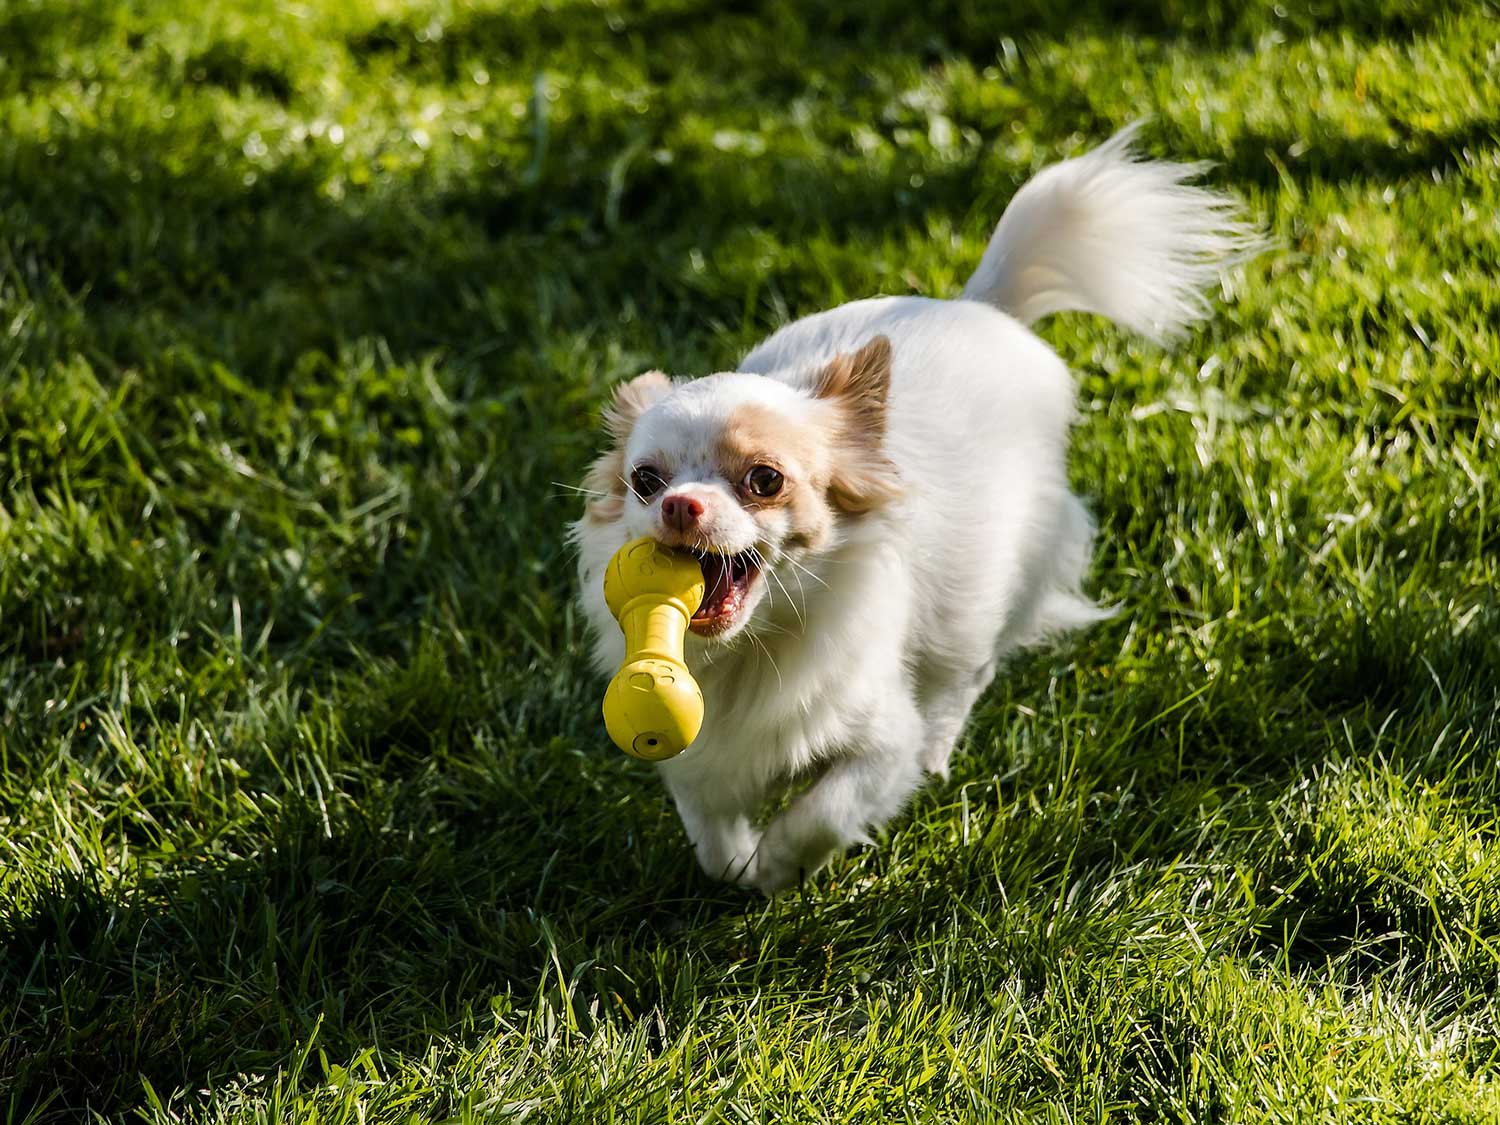 Dog toys are a great way to keep them preoccupied and help curb any destructive behavior.